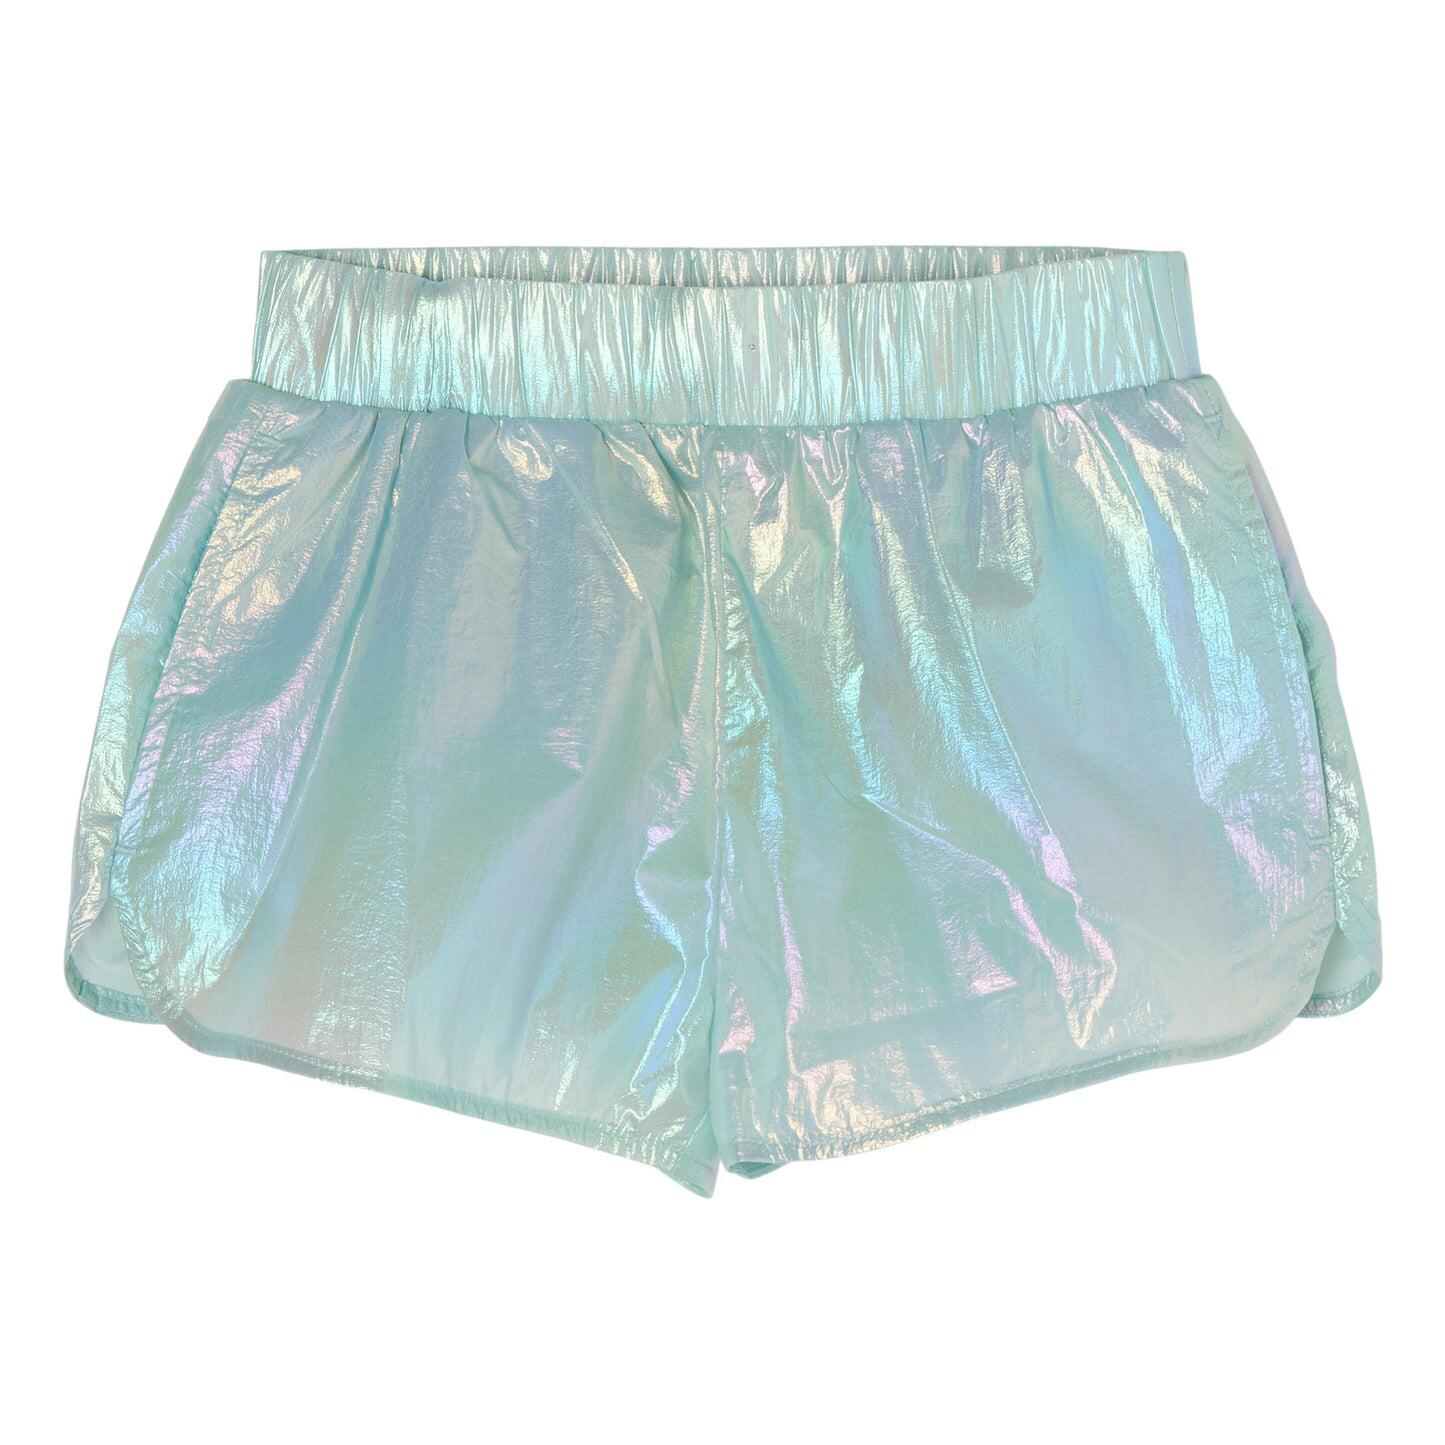 Load image into Gallery viewer, Girls Metallic Shorts in Aqua Blue | Holographic Shorts for Kids
